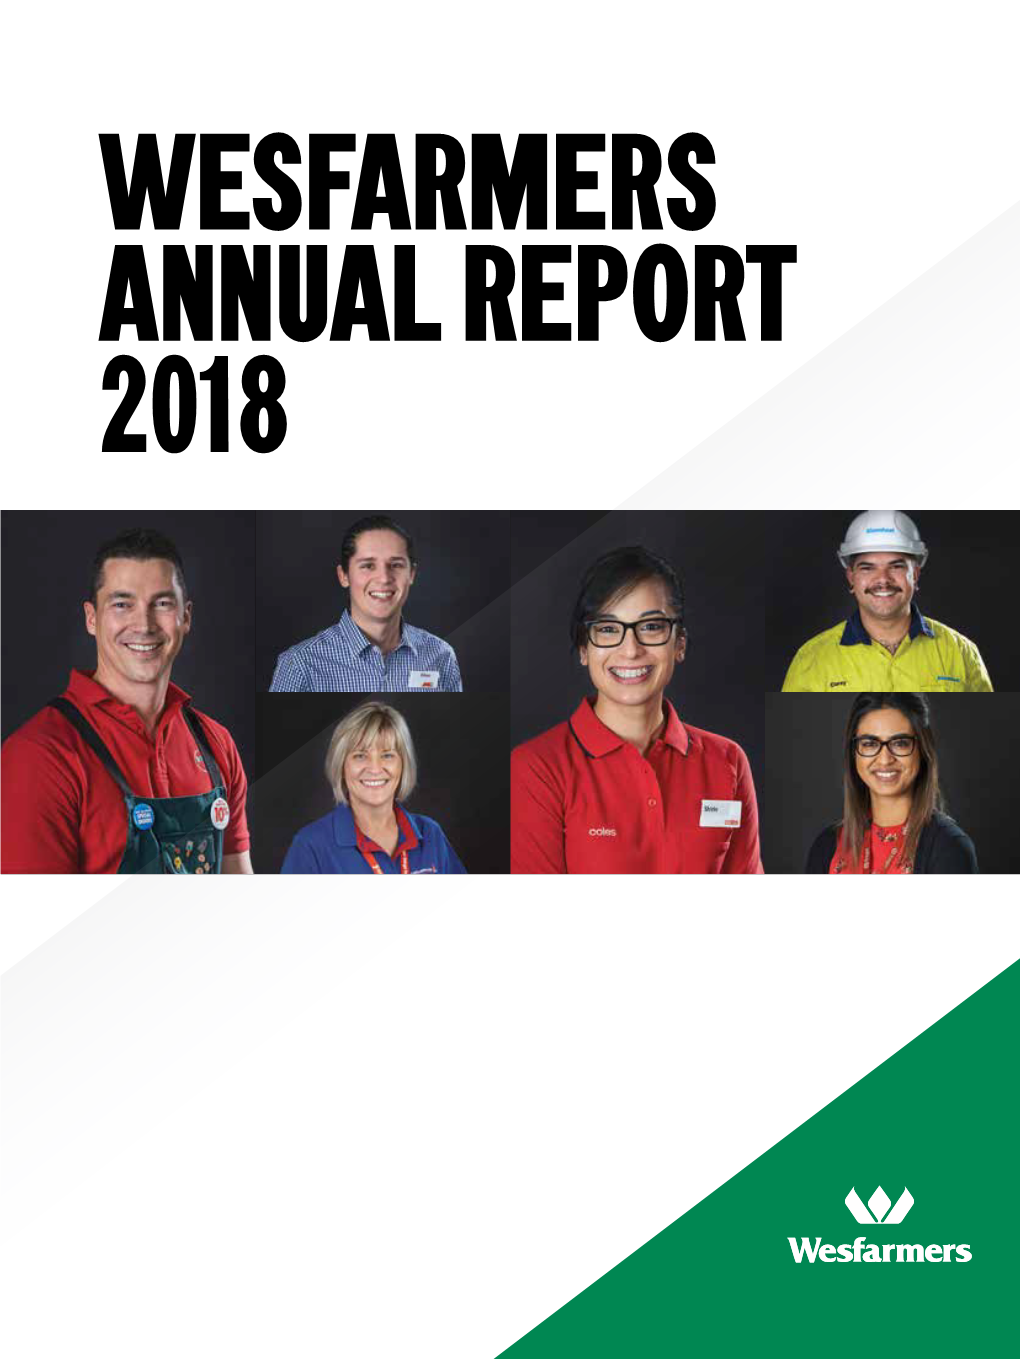 2018 Annual Report 1 Overview